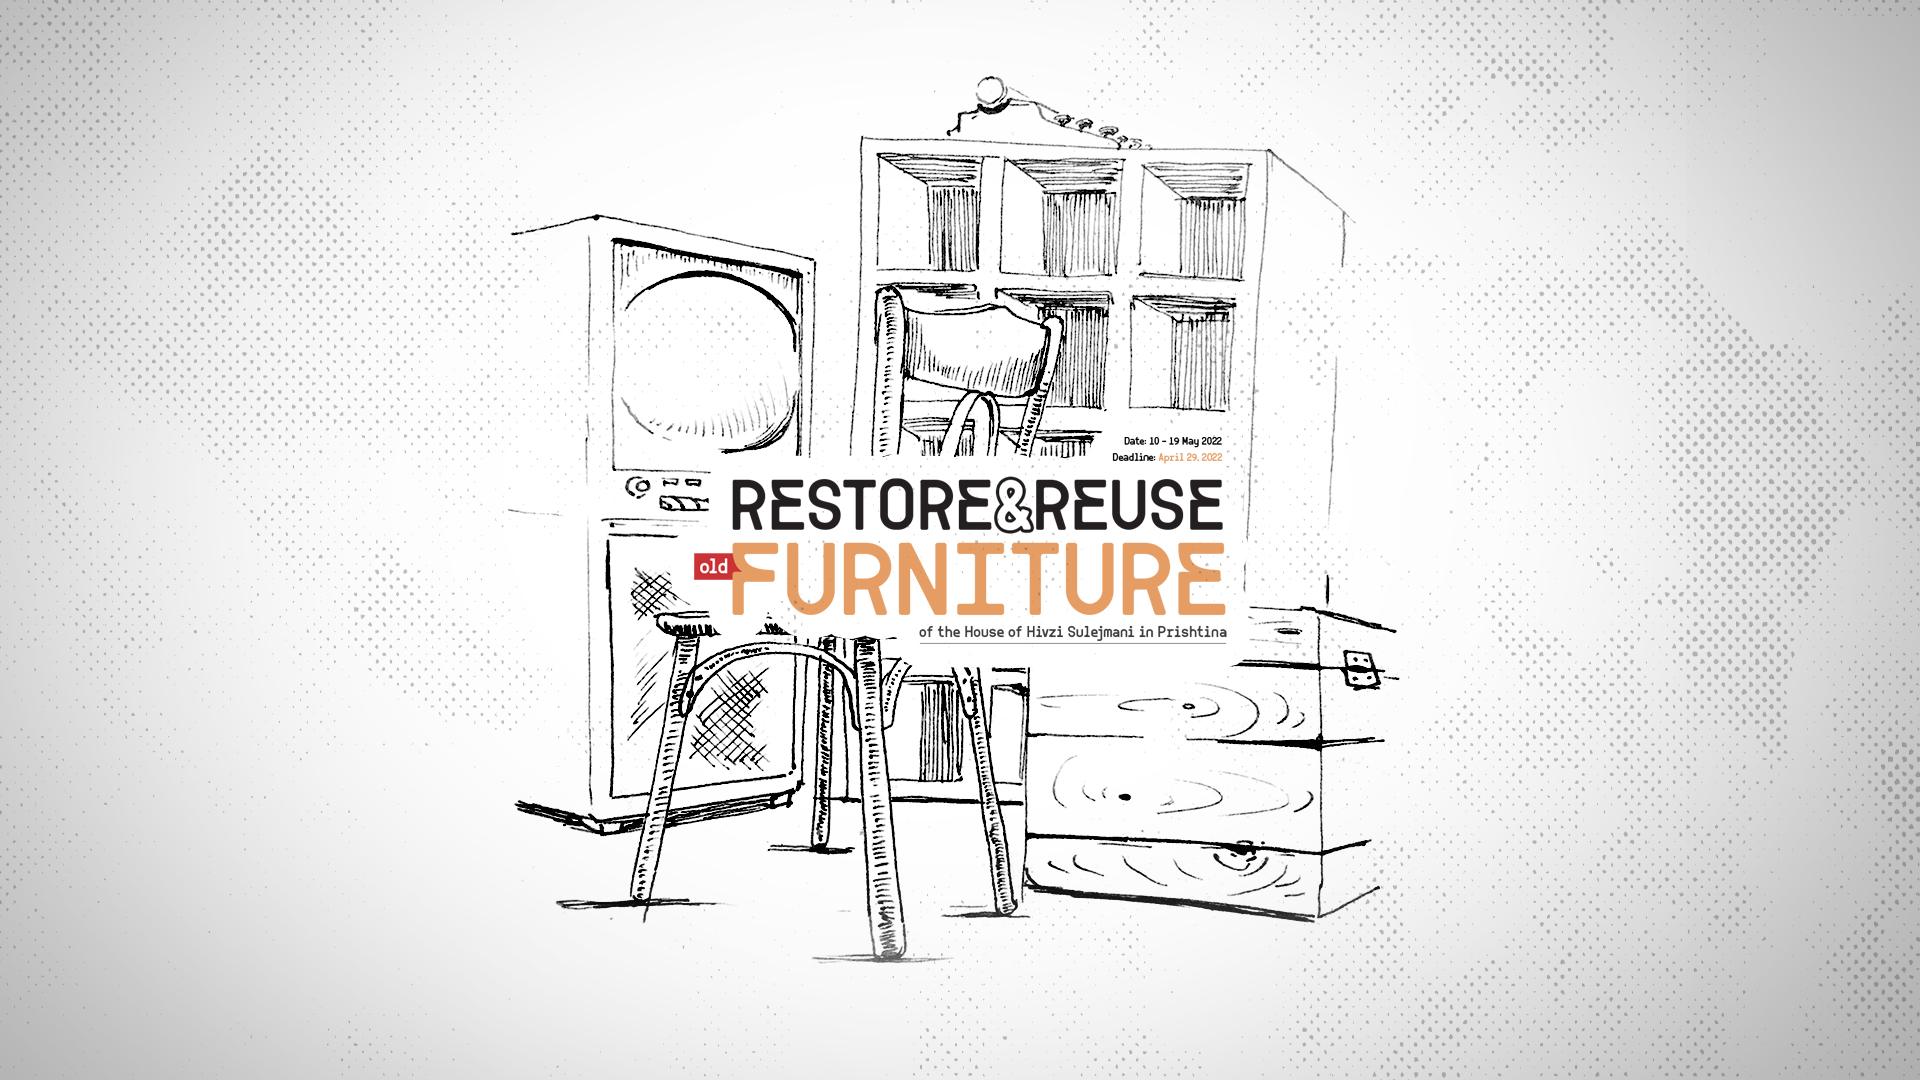 CALL FOR APPLICATION: Restore & Reuse Old Furniture of Hivzi Sulejmani House